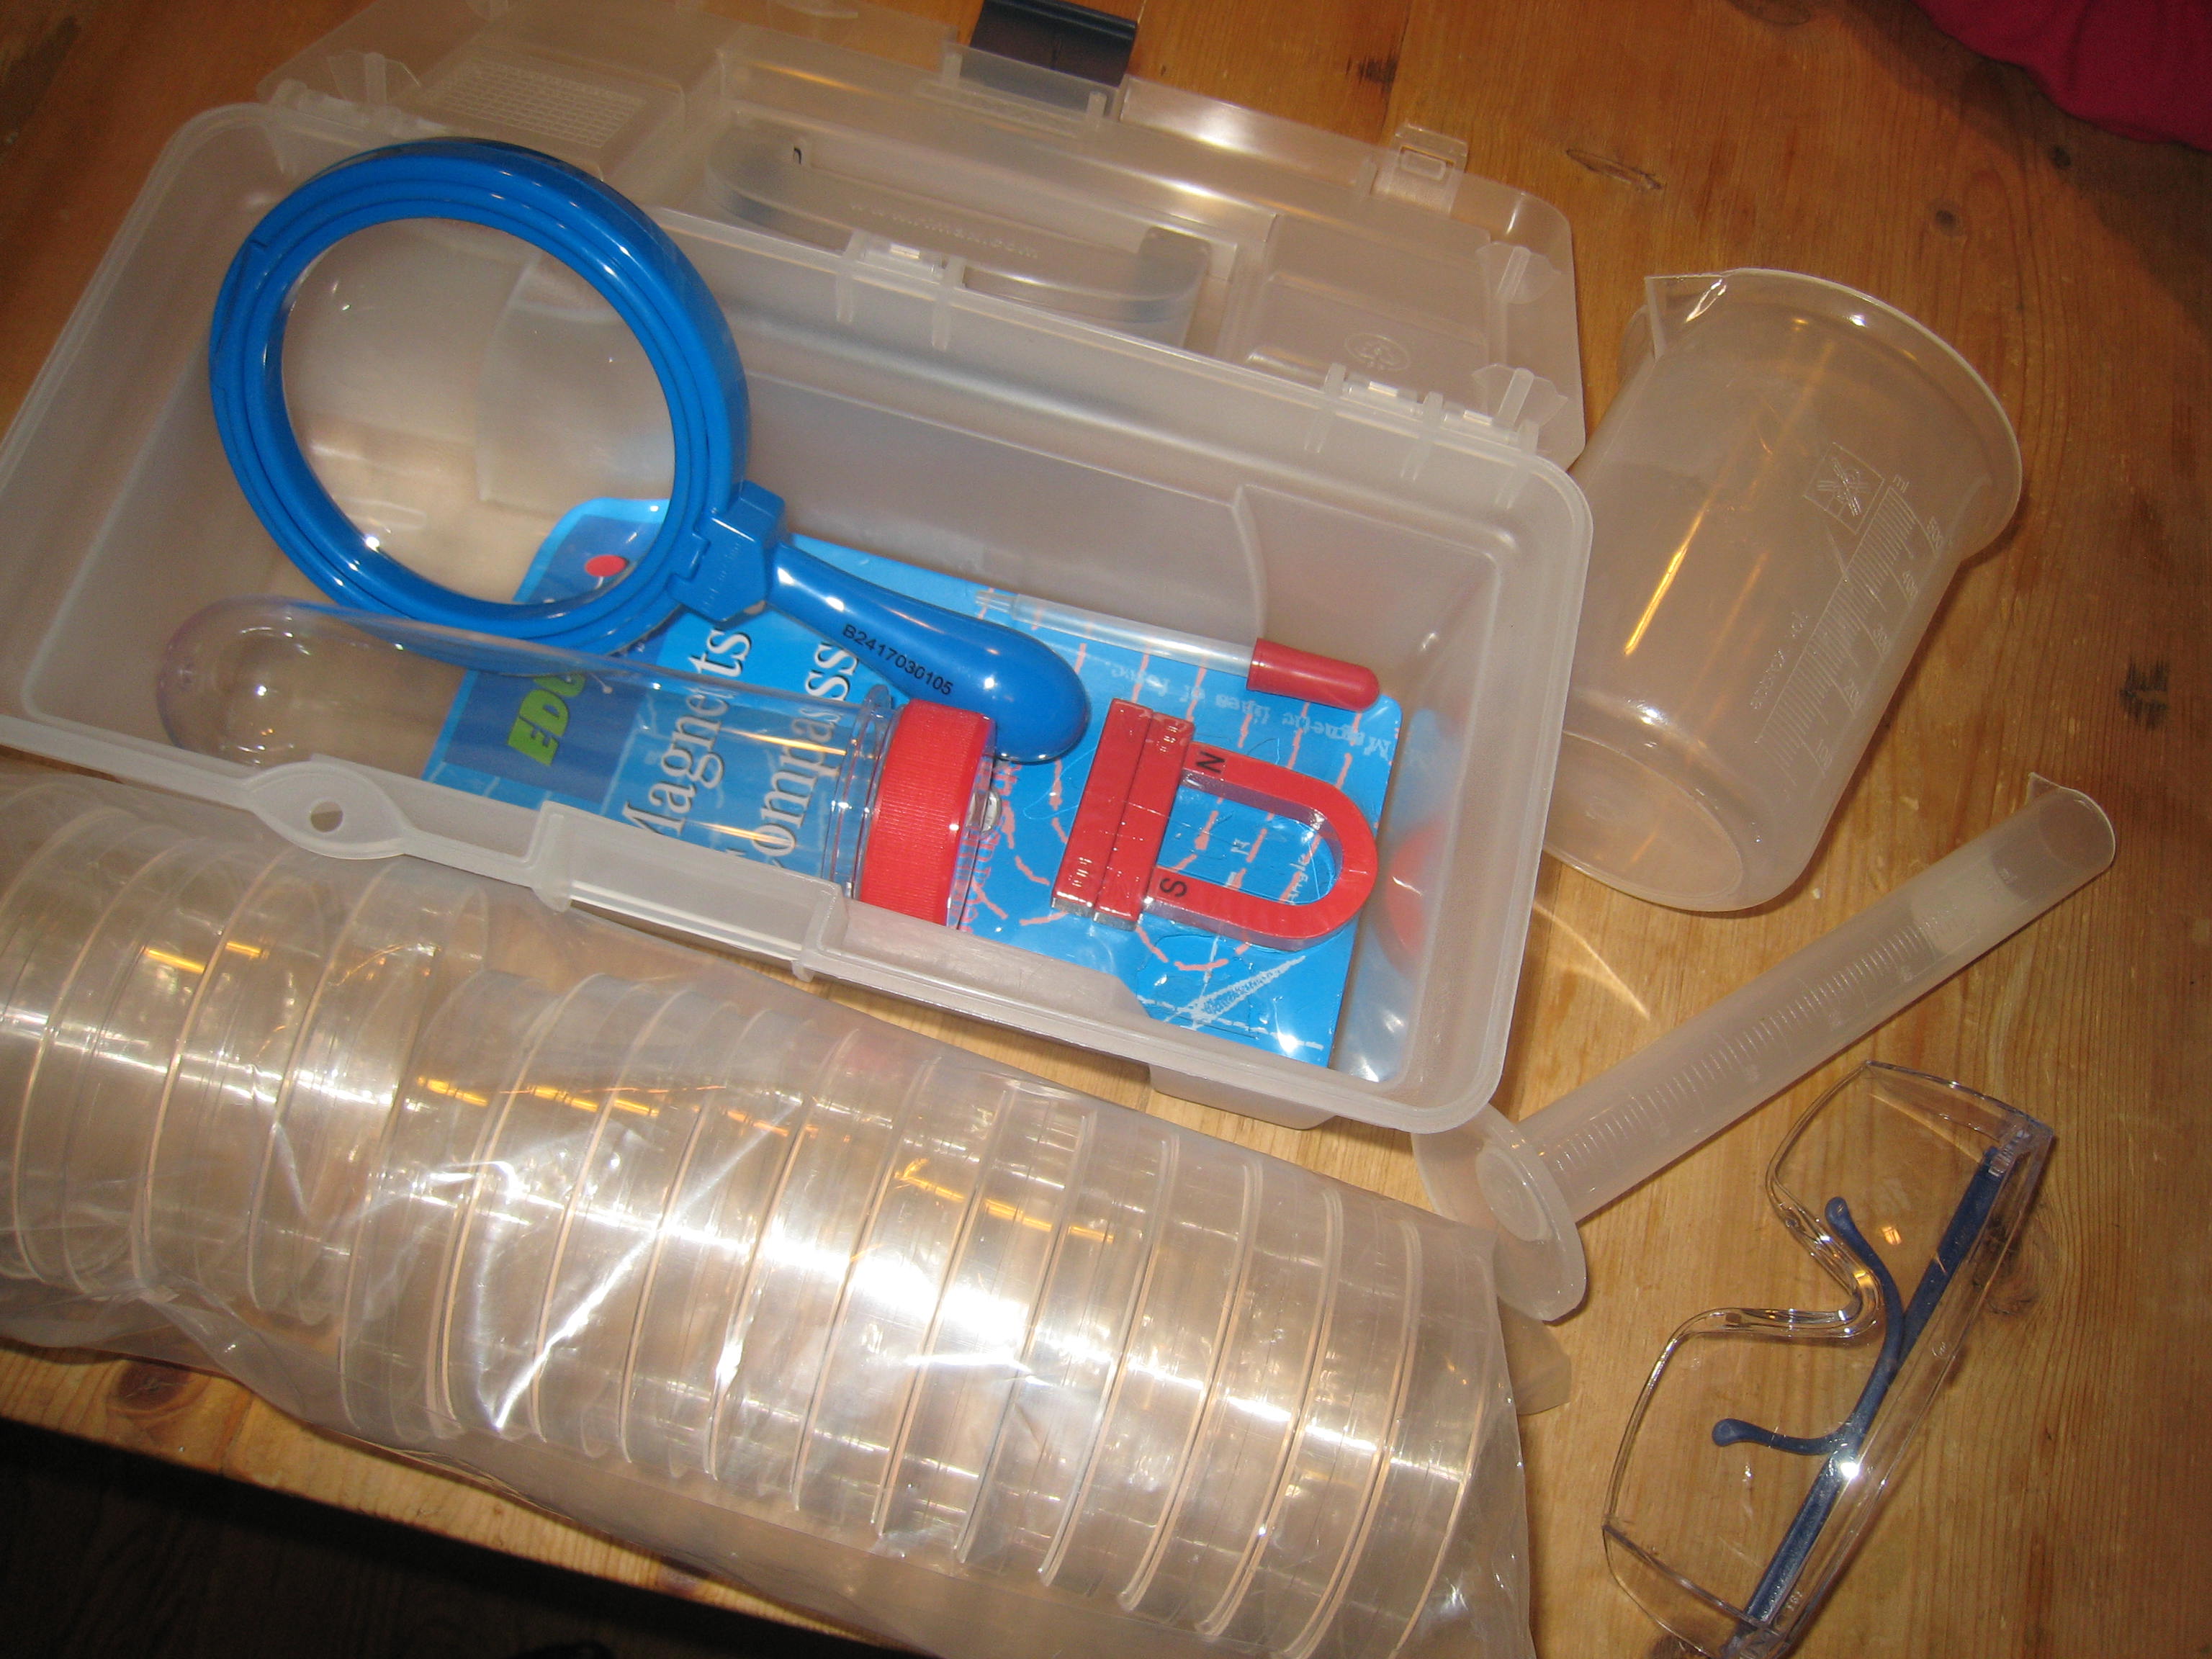 Top 11 DIY science kits for kids - Non-Toy Gifts